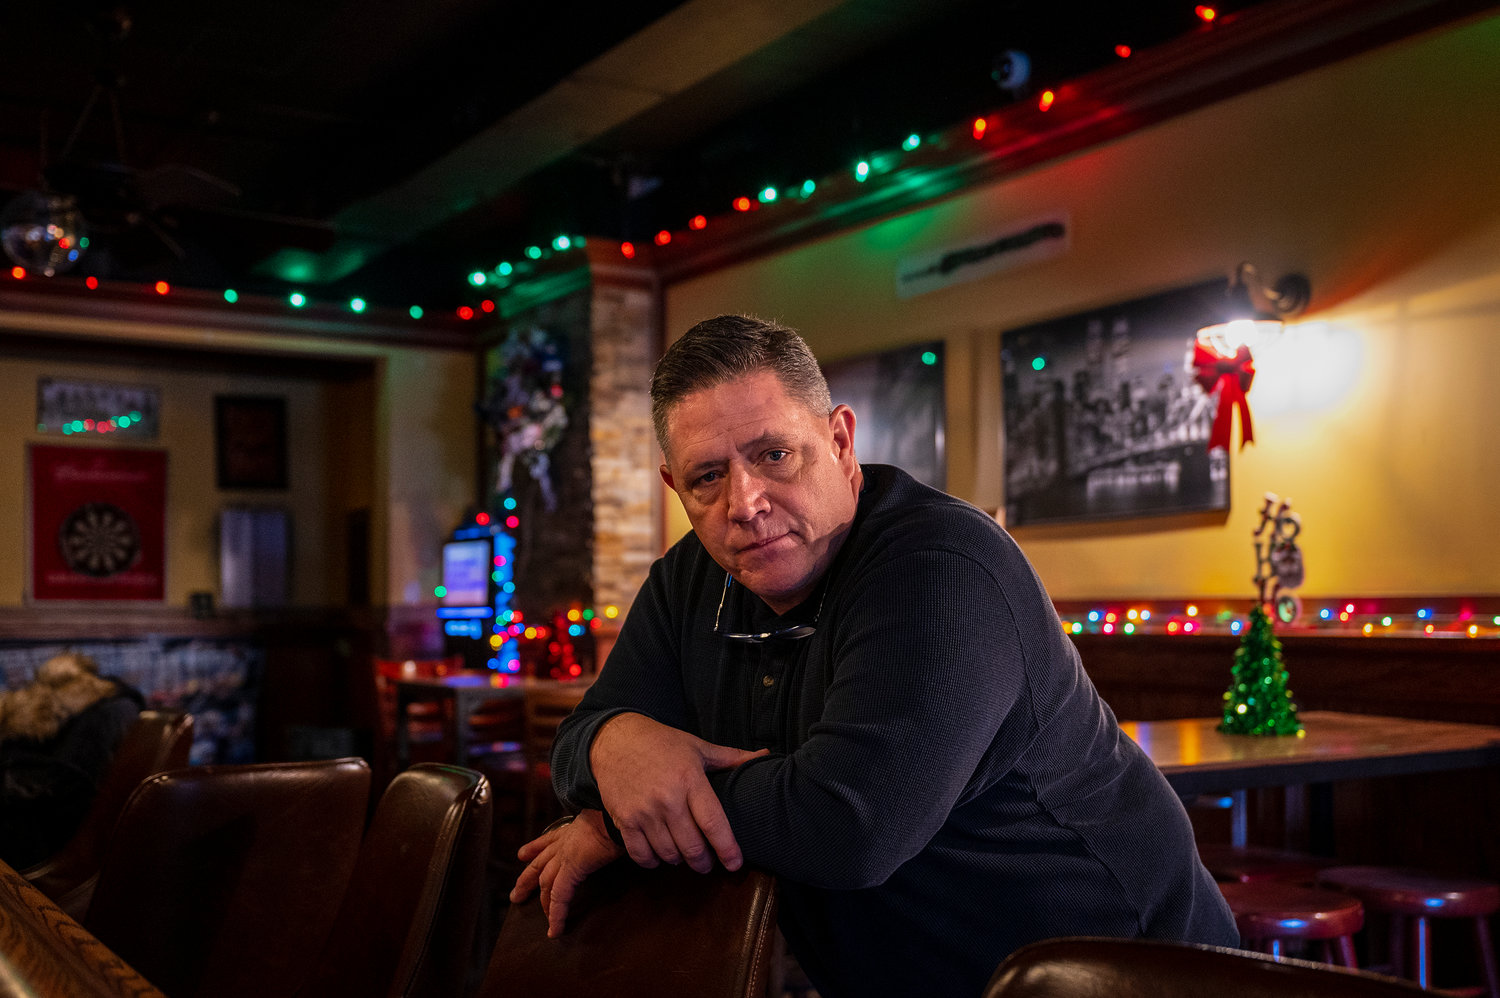 Richard Walsh, a bartender at Mr. Viggs bar in North Riverdale, says the loss of his friend Terence Mulvey means their annual toy drive to NewYork-Presbyterian Morgan Stanley Children's Hospital won’t be the same. Yet Walsh promised Mulvey he would continue to run the charity.